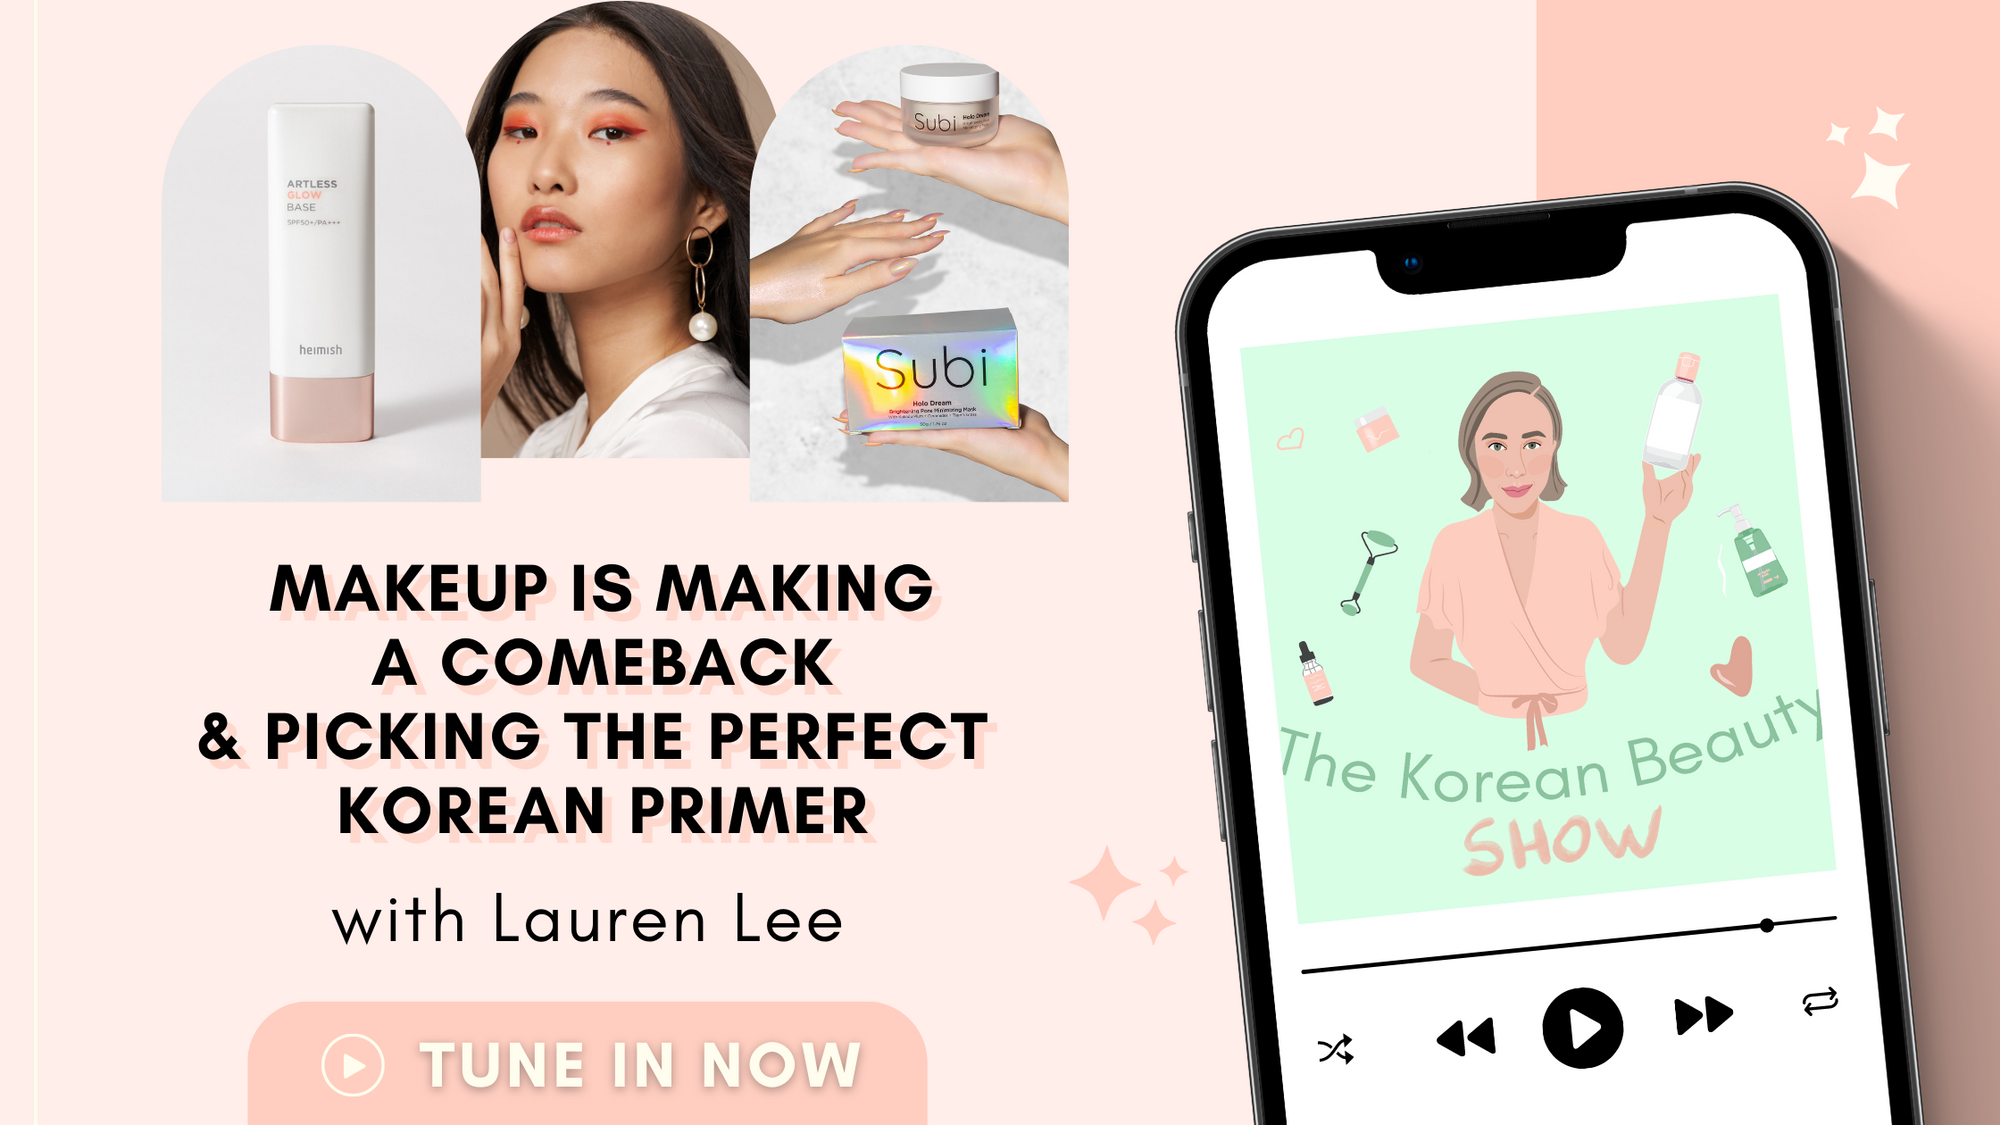 Makeup is making a comeback & picking the perfect Korean primer